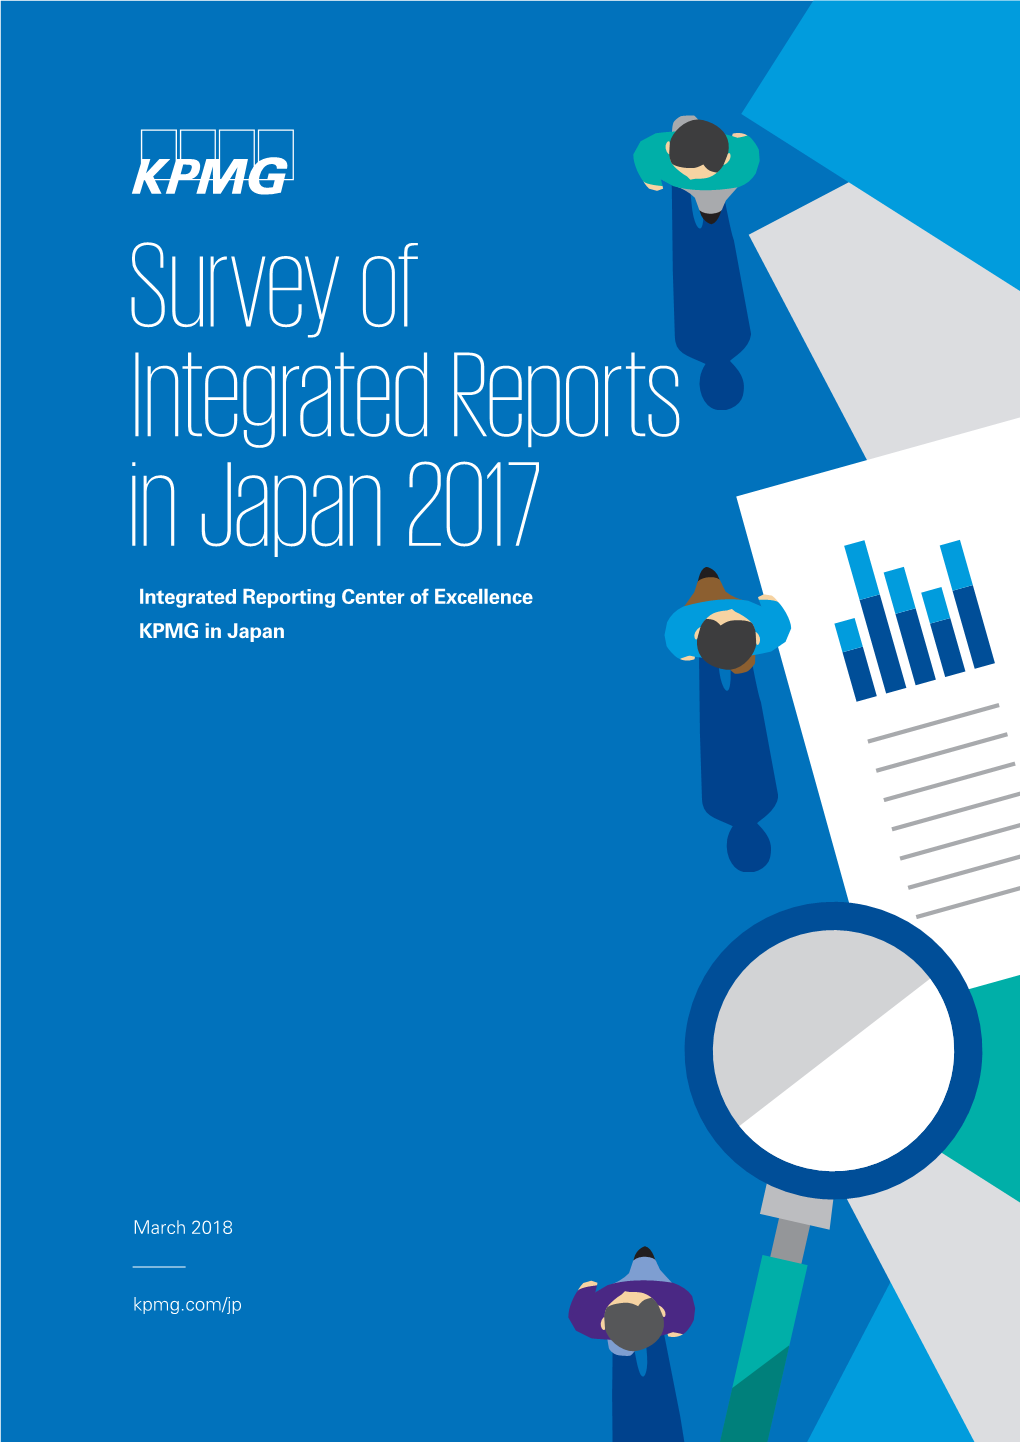 Survey of Integrated Reports in Japan 2017